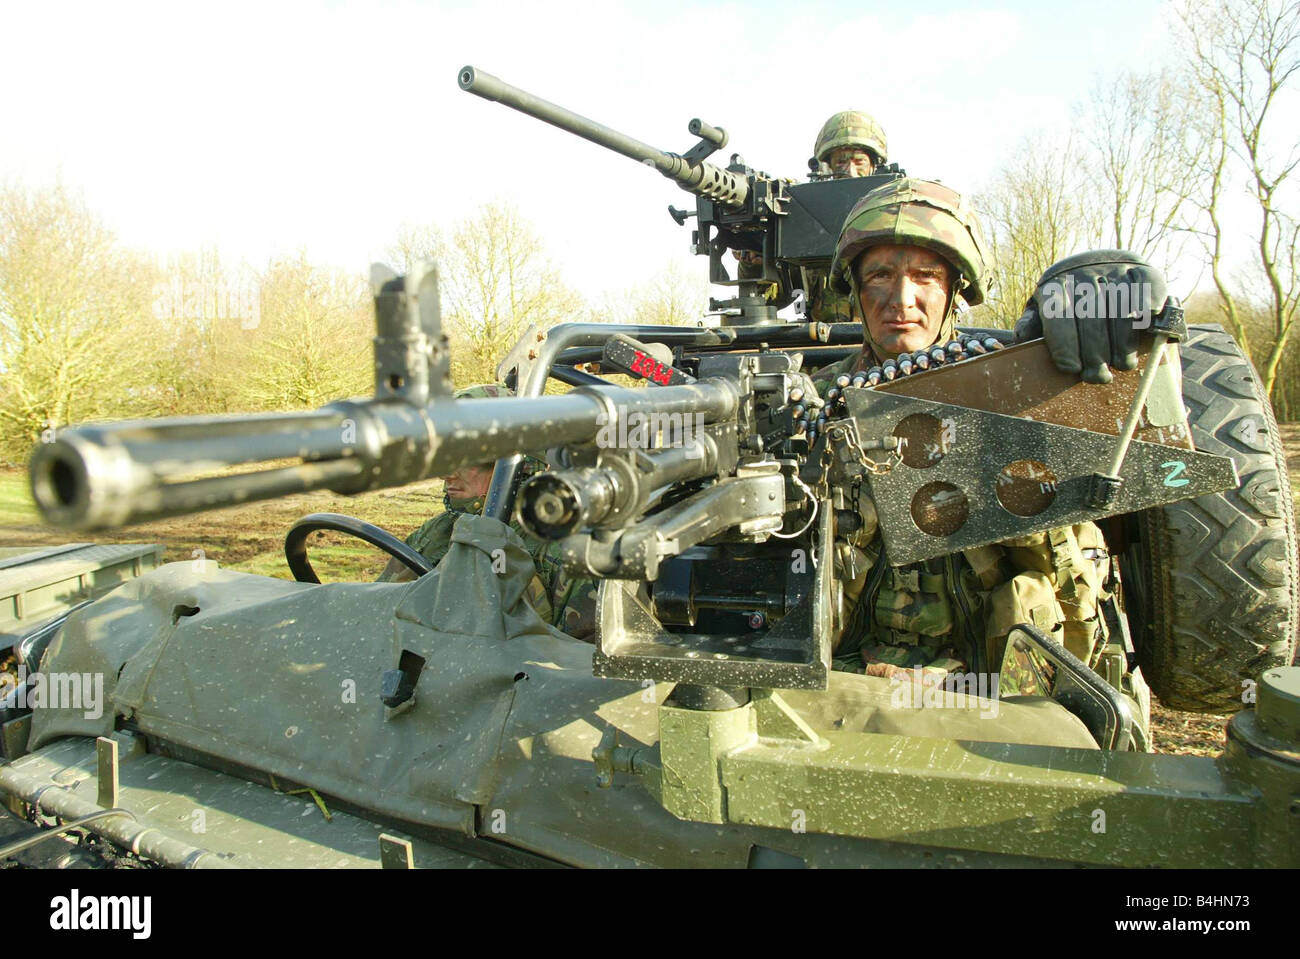 RIR Soldiers Train For The Gulf In Colchester January 2003 Sergant Furlong of the Royal Irish Regiment Stock Photo